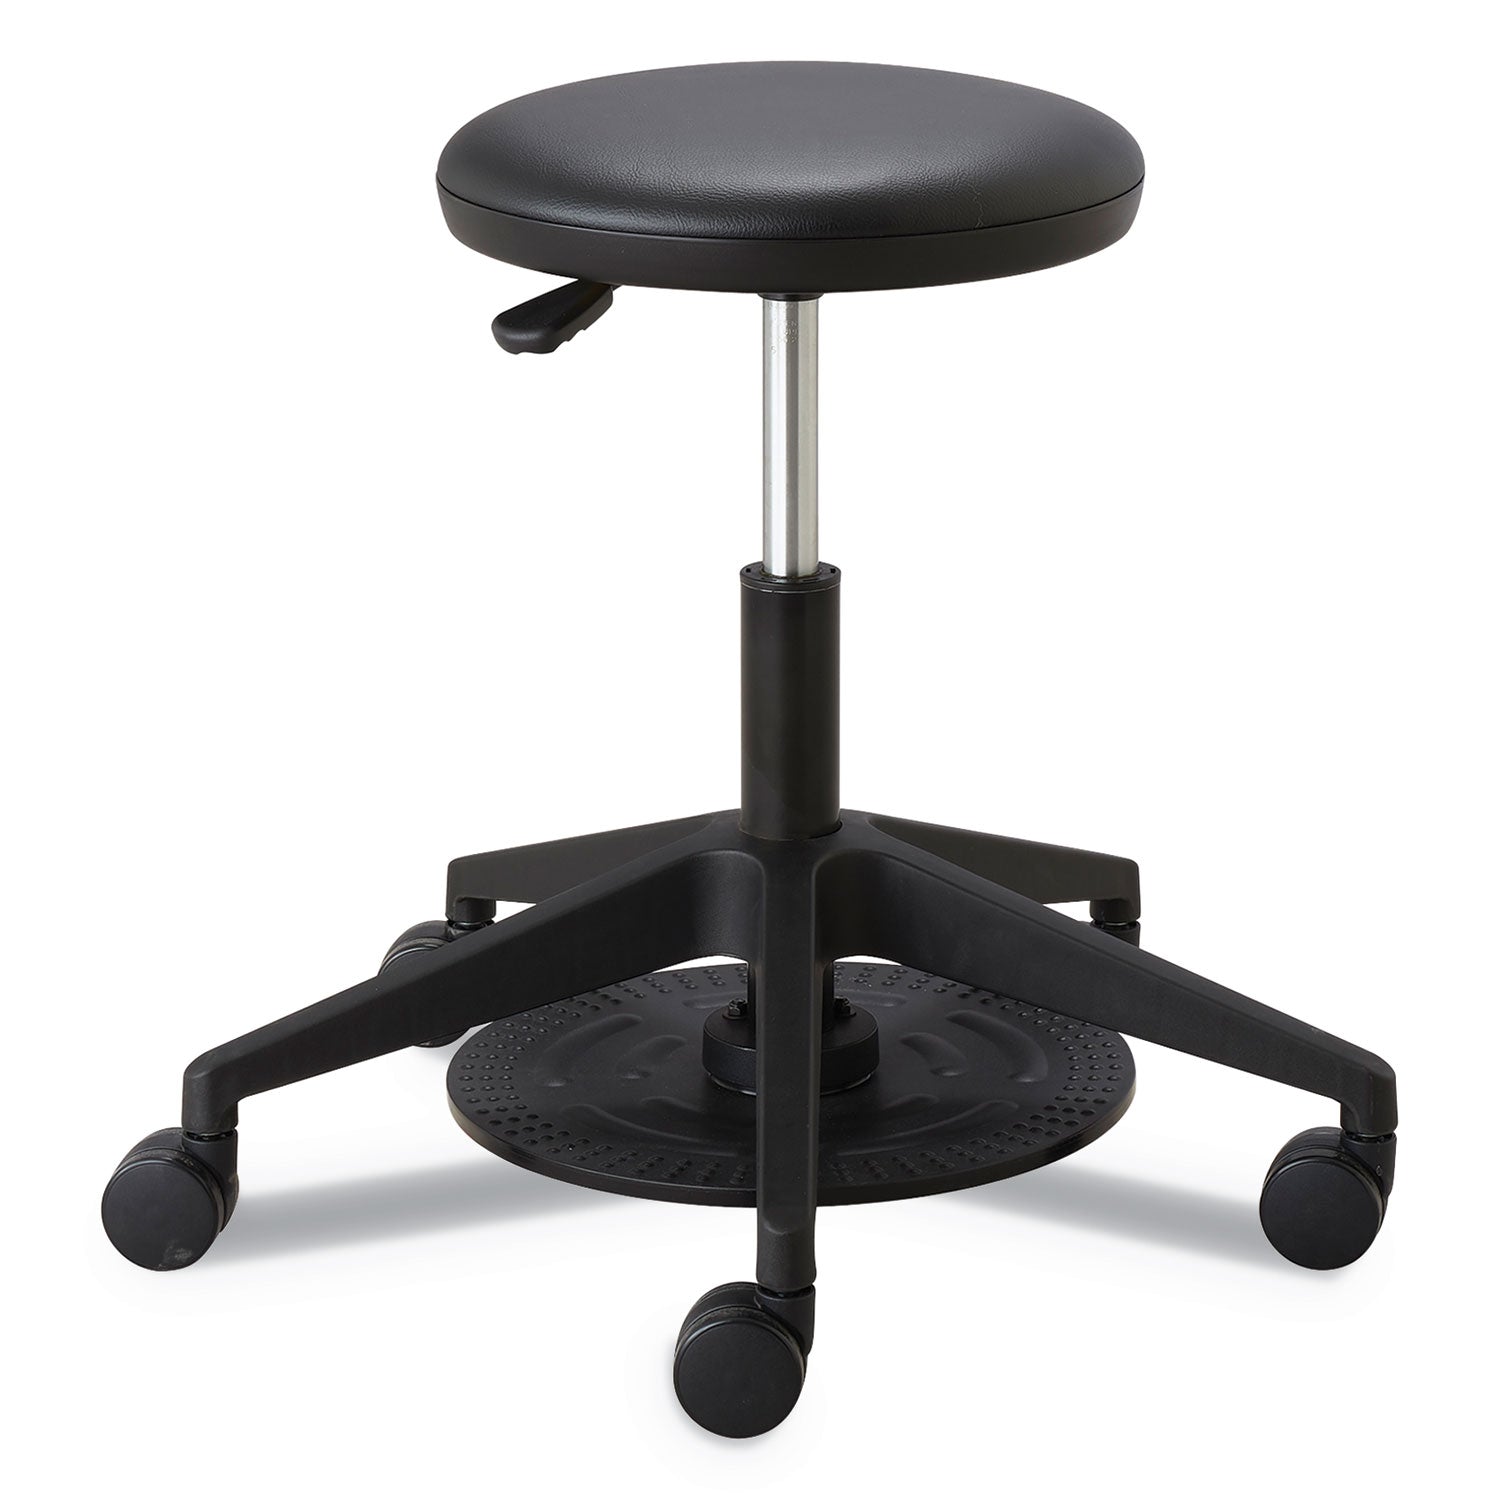 lab-stool-backless-supports-up-to-250-lb-1925-to-2425-seat-height-black_saf3437bl - 1